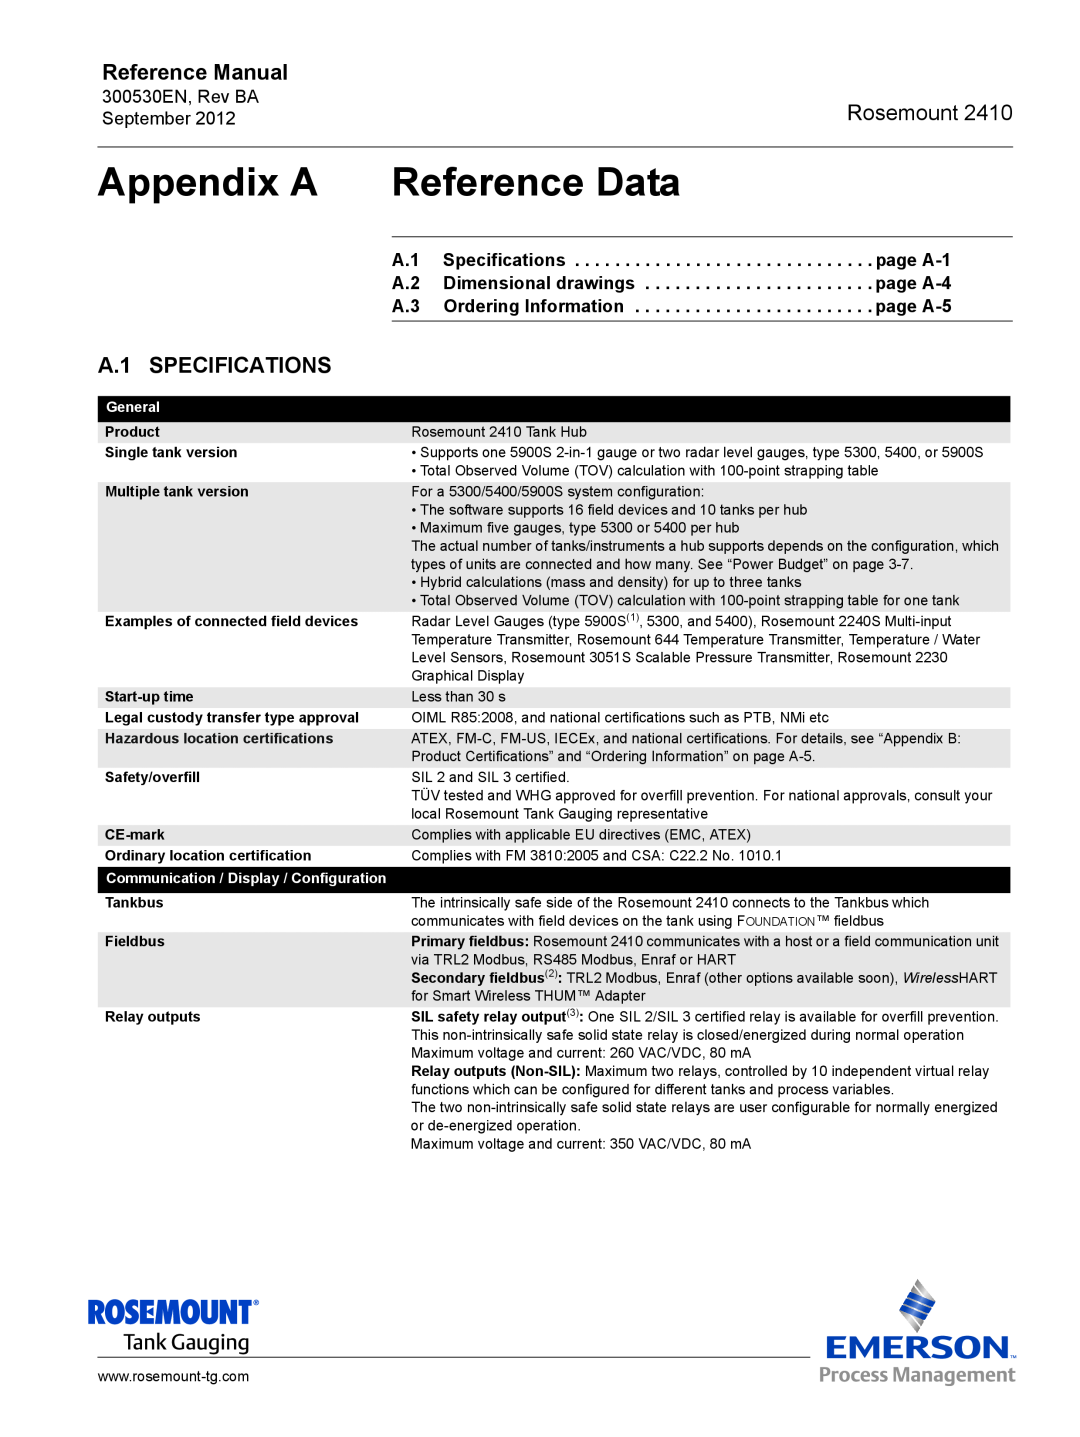 Emerson Process Management Rosemount 2410 Appendix A, Reference Data, A.1 SPECIFICATIONS, page A-1, page A-4, page A-5 